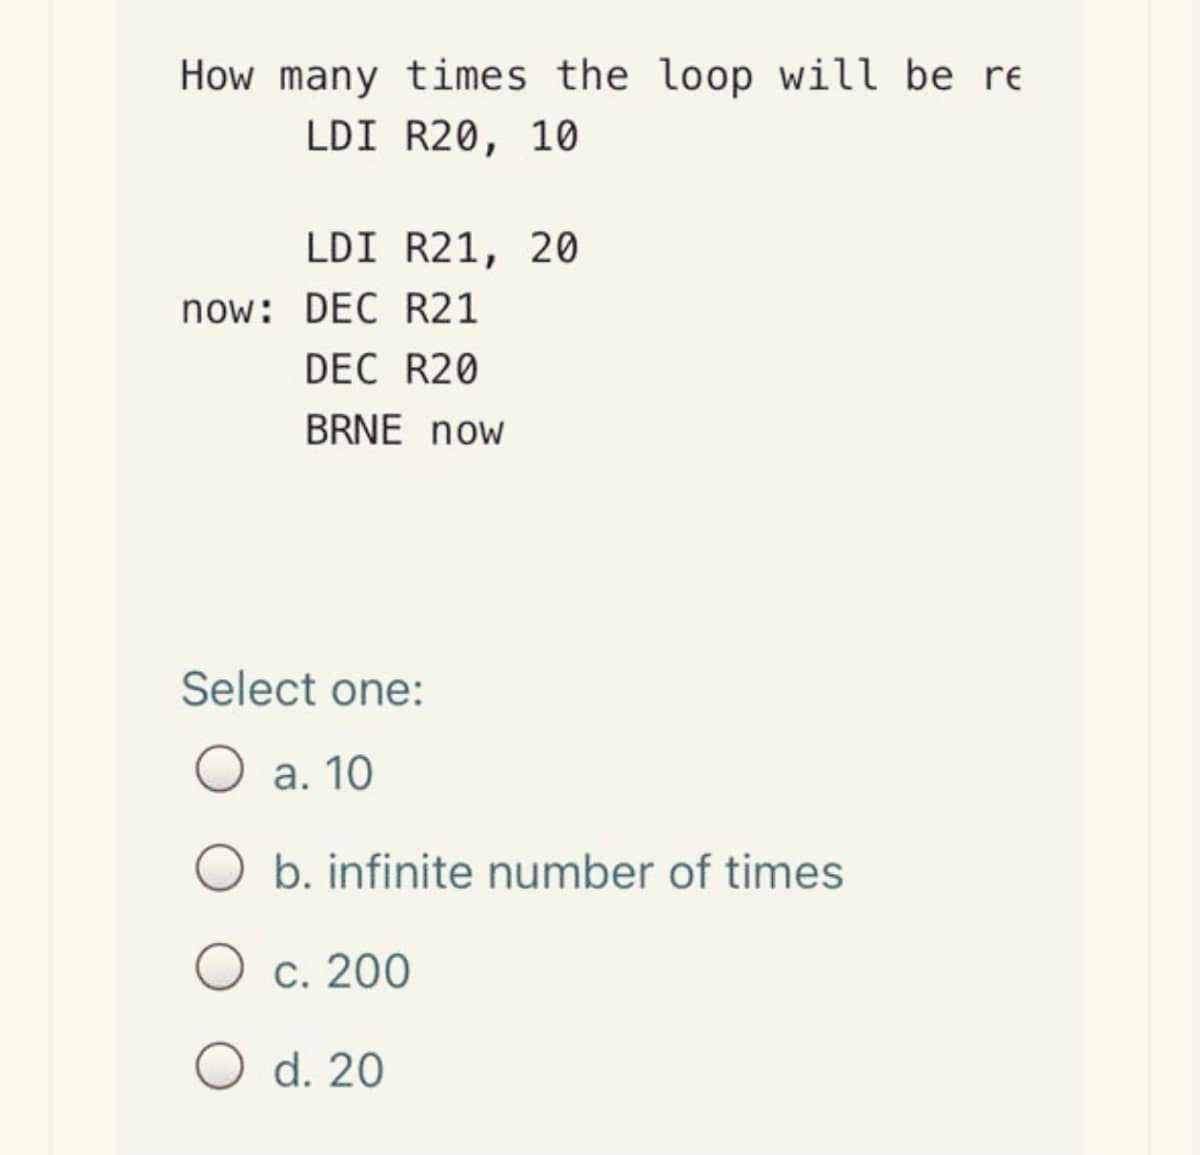 How many times the loop will be re
LDI R20, 10
LDI R21, 20
now: DEC R21
DEC R20
BRNE now
Select one:
а. 10
b. infinite number of times
O c. 200
O d. 20
